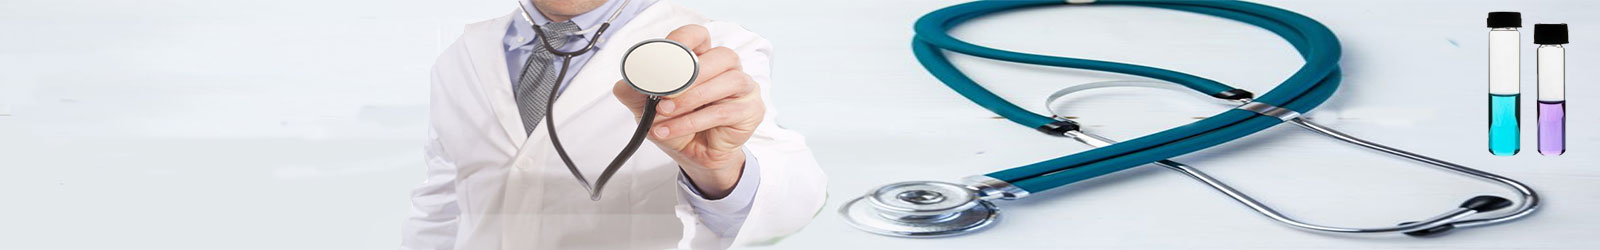 Annual Health Check Up Packages in Delhi NCR